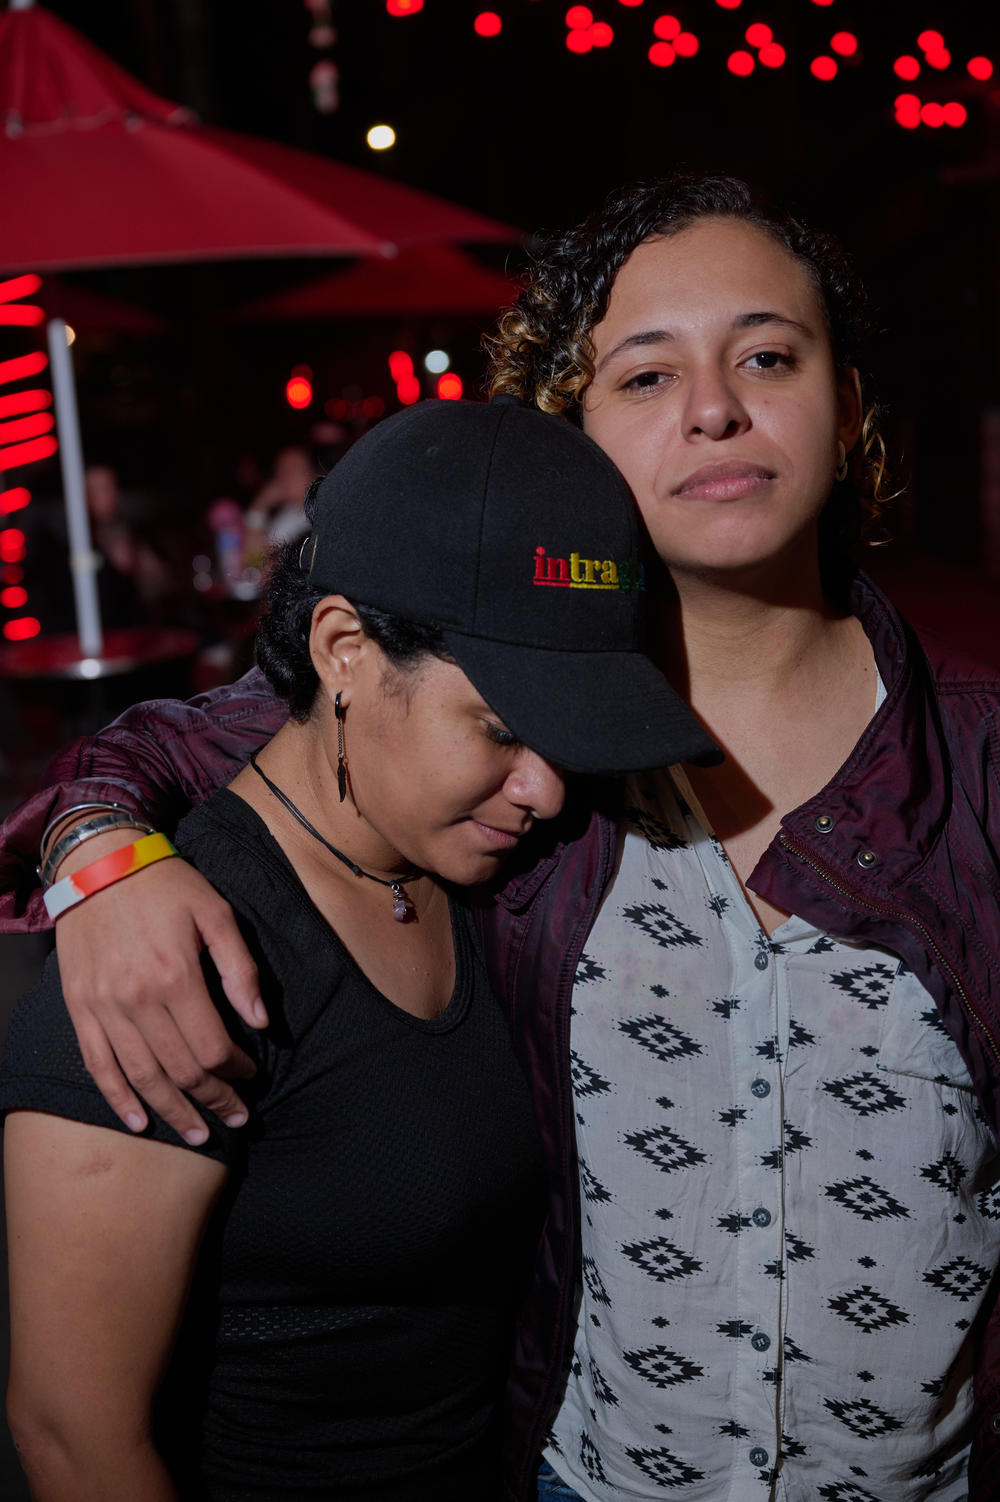 Tay and Carolina pose for a portrait in downtown Medellín. Carolina is Tay's girlfriend, pictured wearing an Intragender cap — the collective Tay founded that focuses on issues of violence within queer relationships.